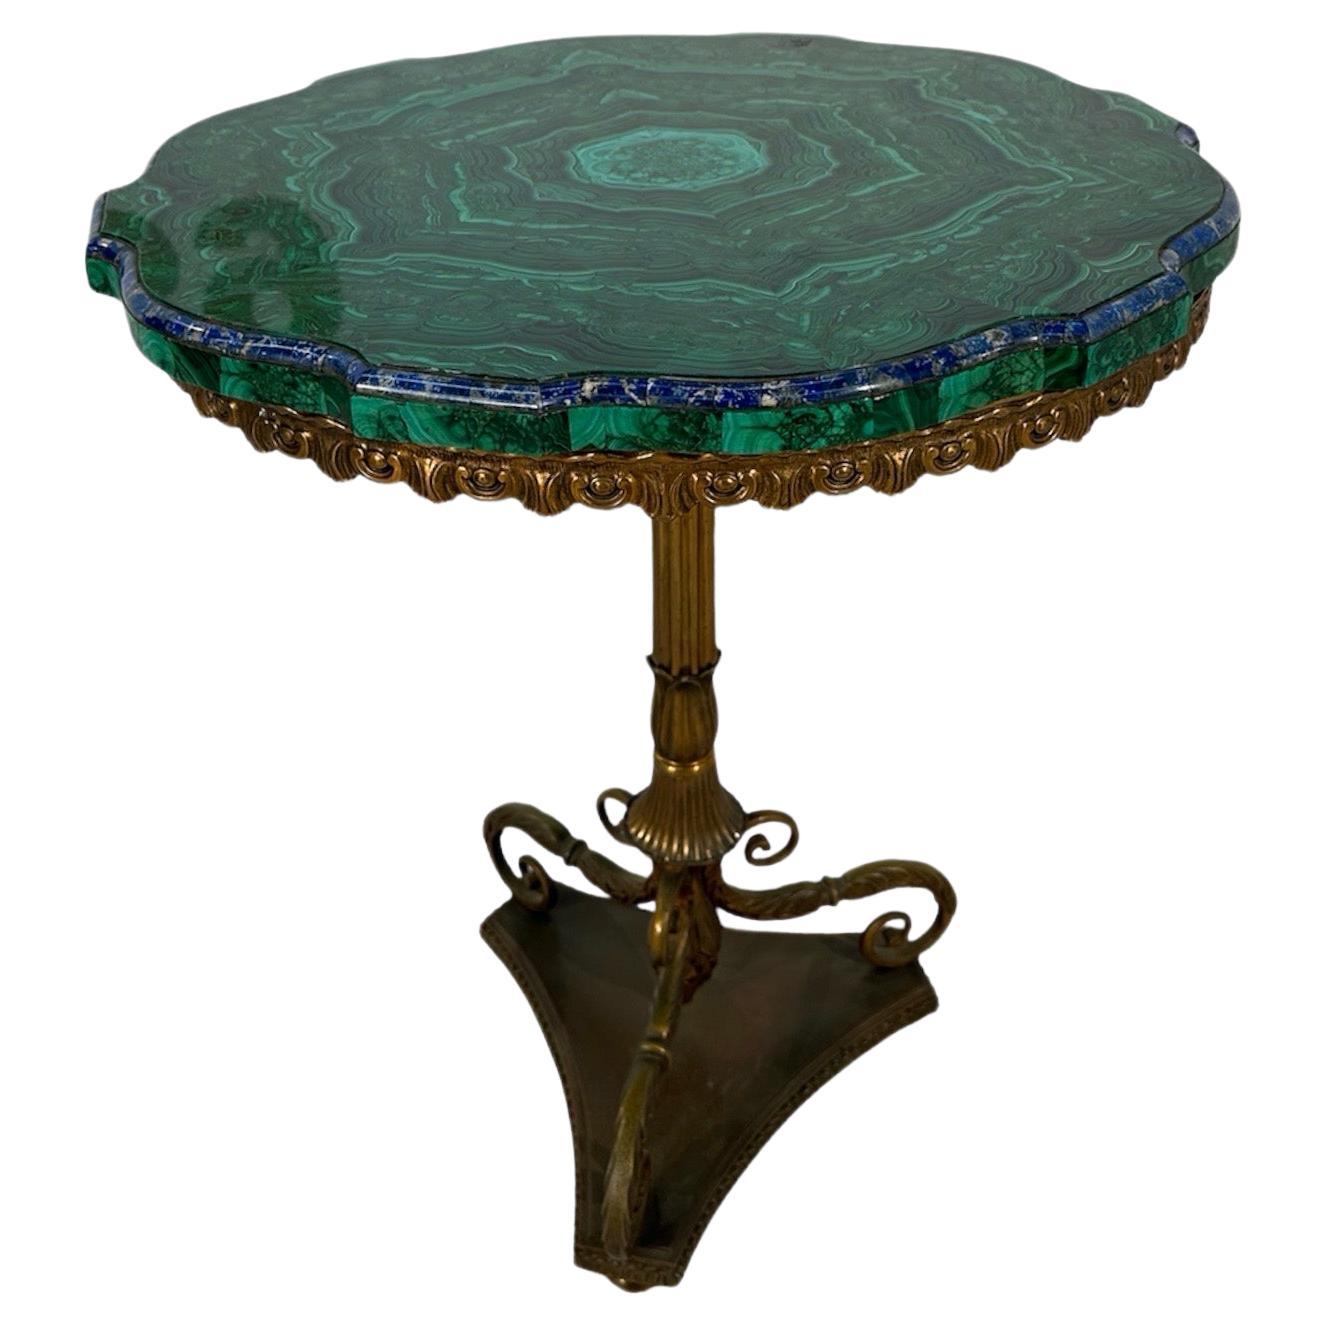 Vintage ItalianBrass and Malachite Stone Side Table 1940s For Sale